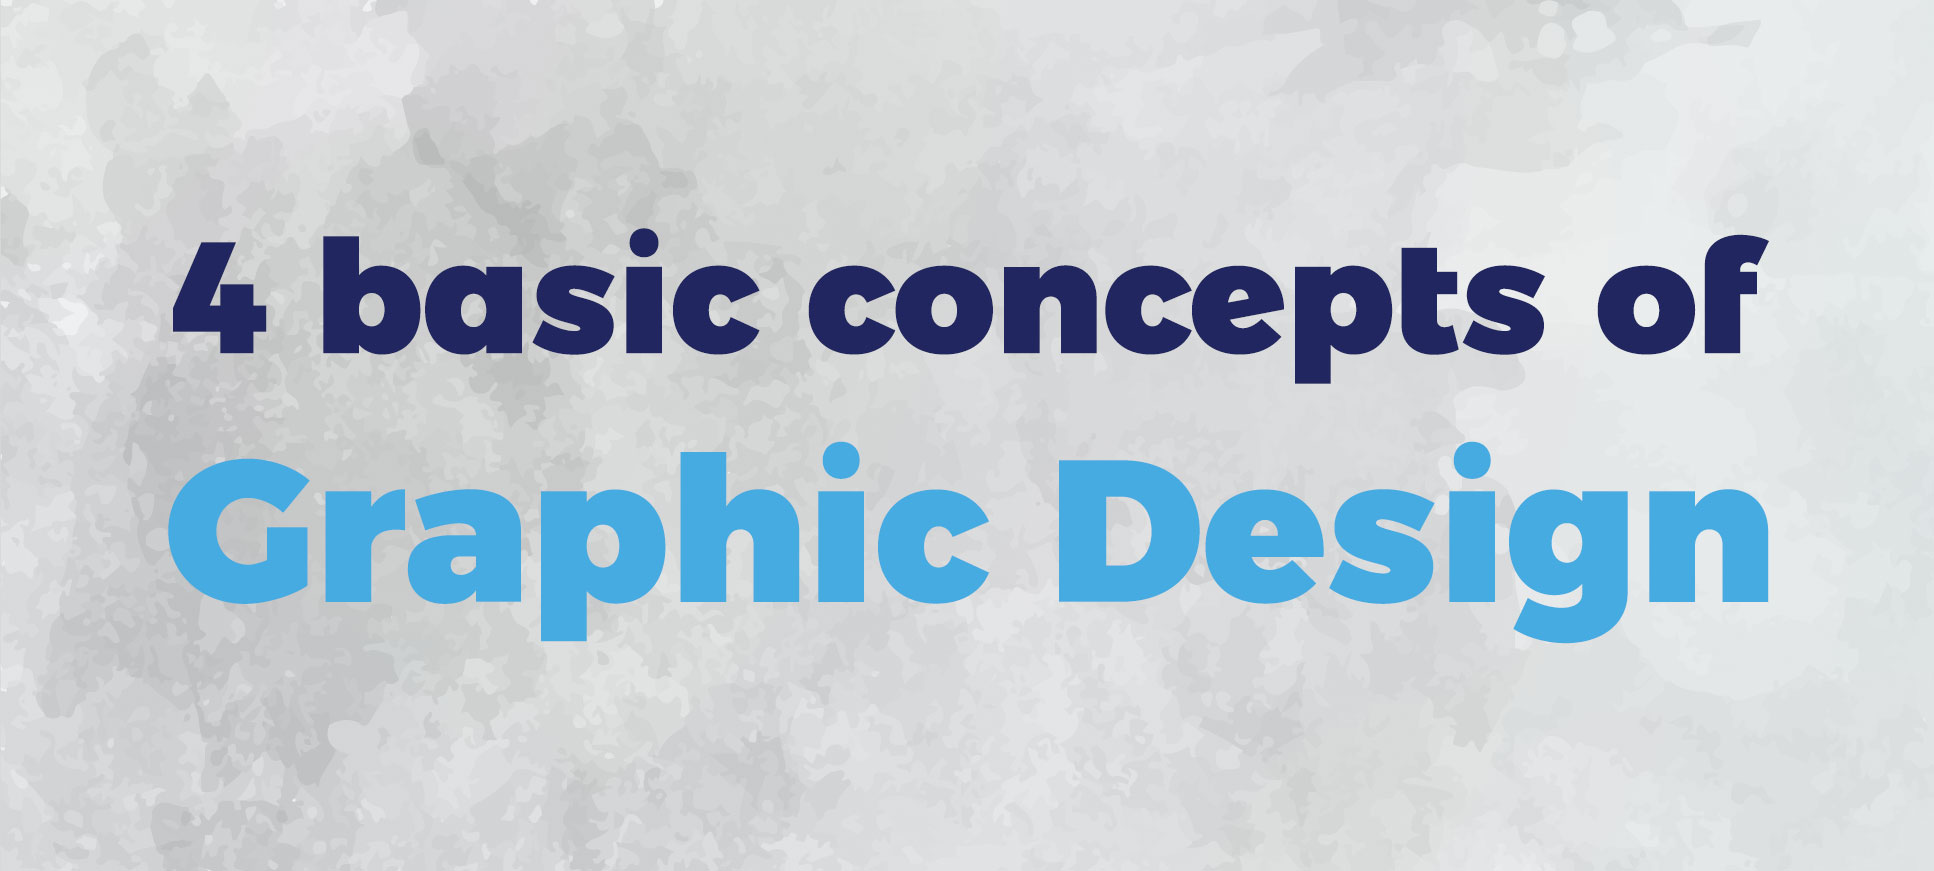 4 basic concepts of graphic design